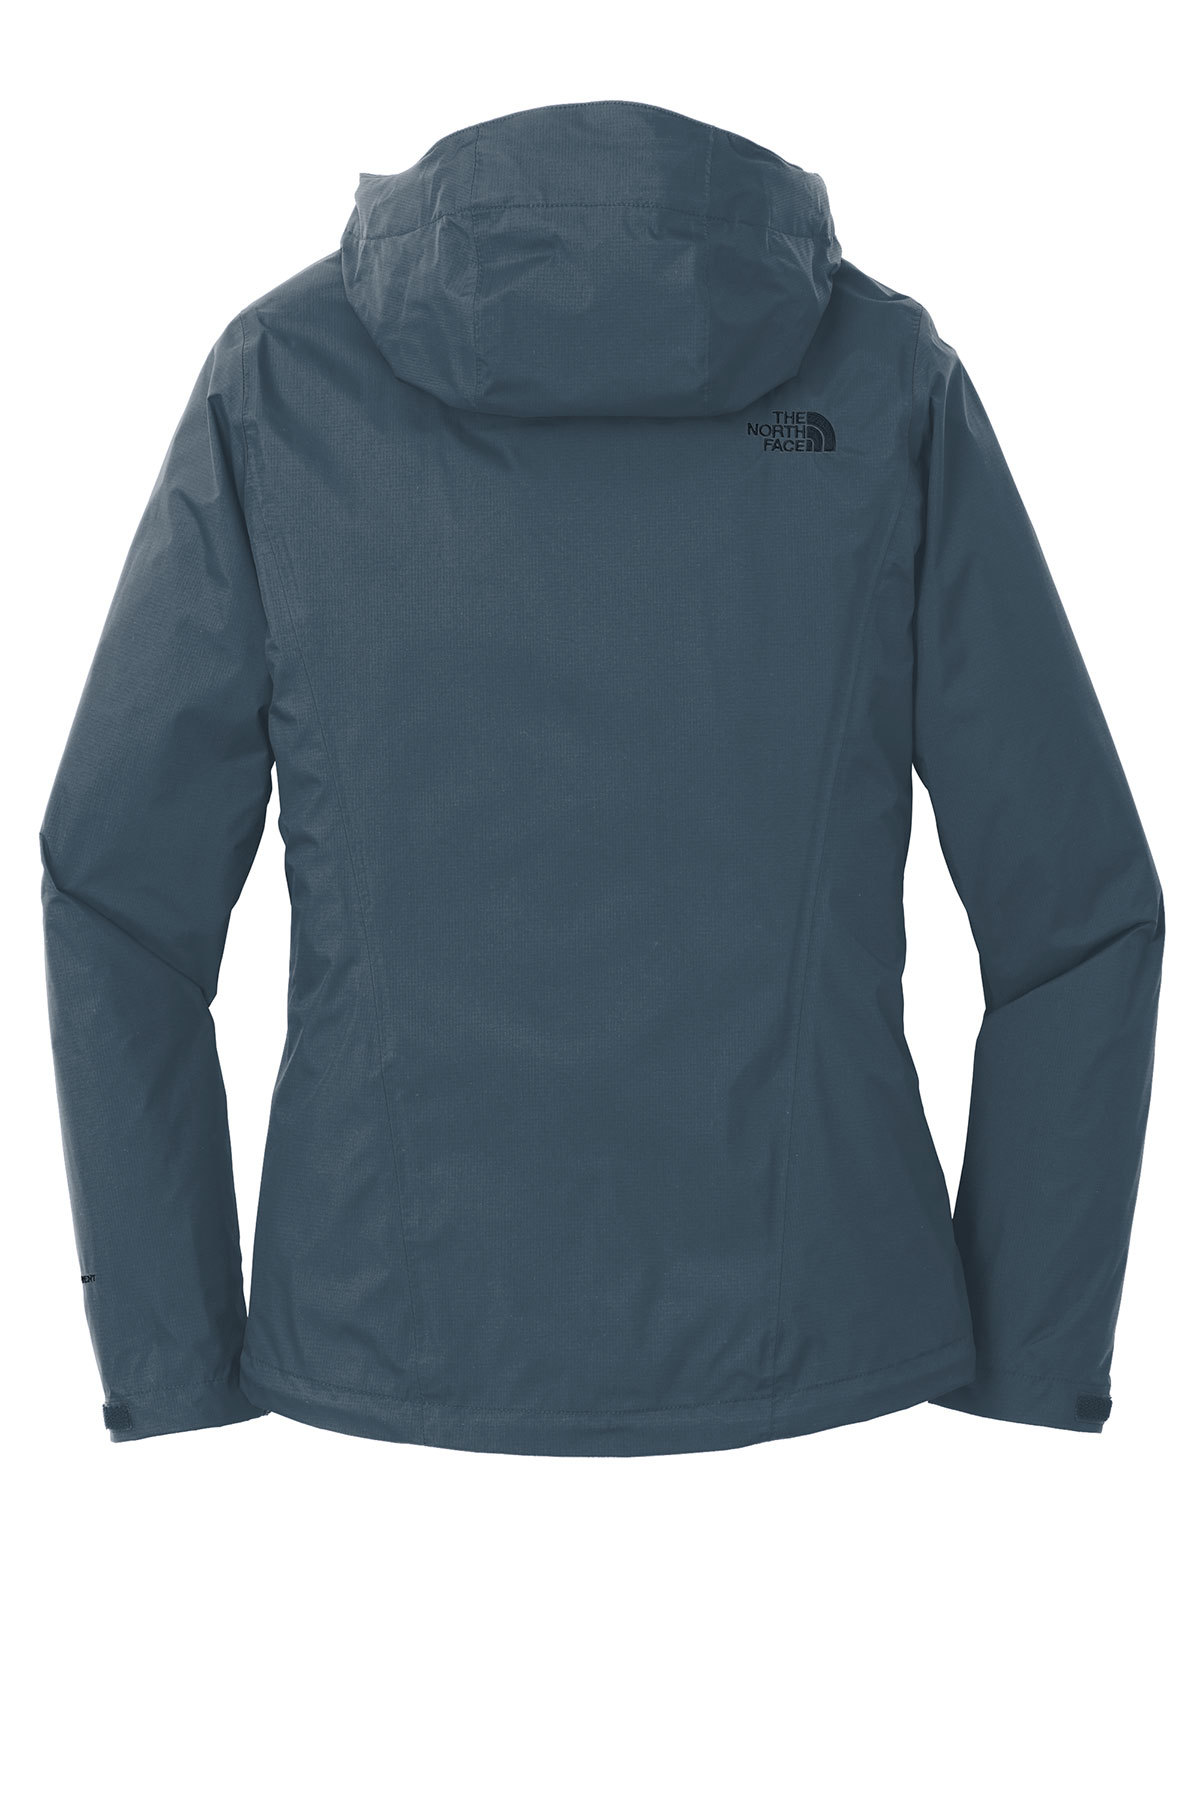 WOMENS NORTH FACE HYVENT TURQUOISE RAIN JACKET L spw – A Second Peek  Boutique